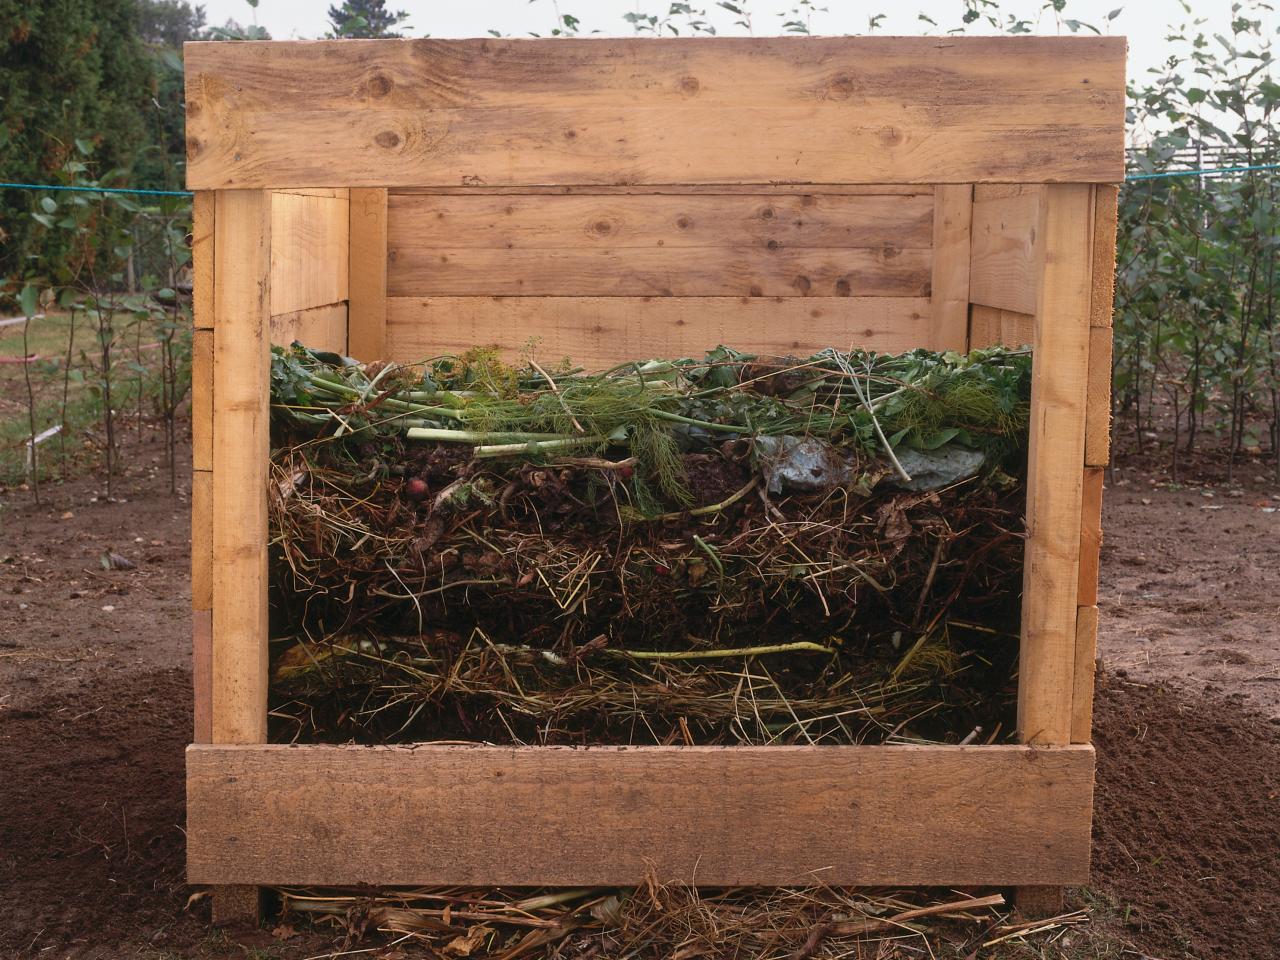 How Do You Make Your Own Compost